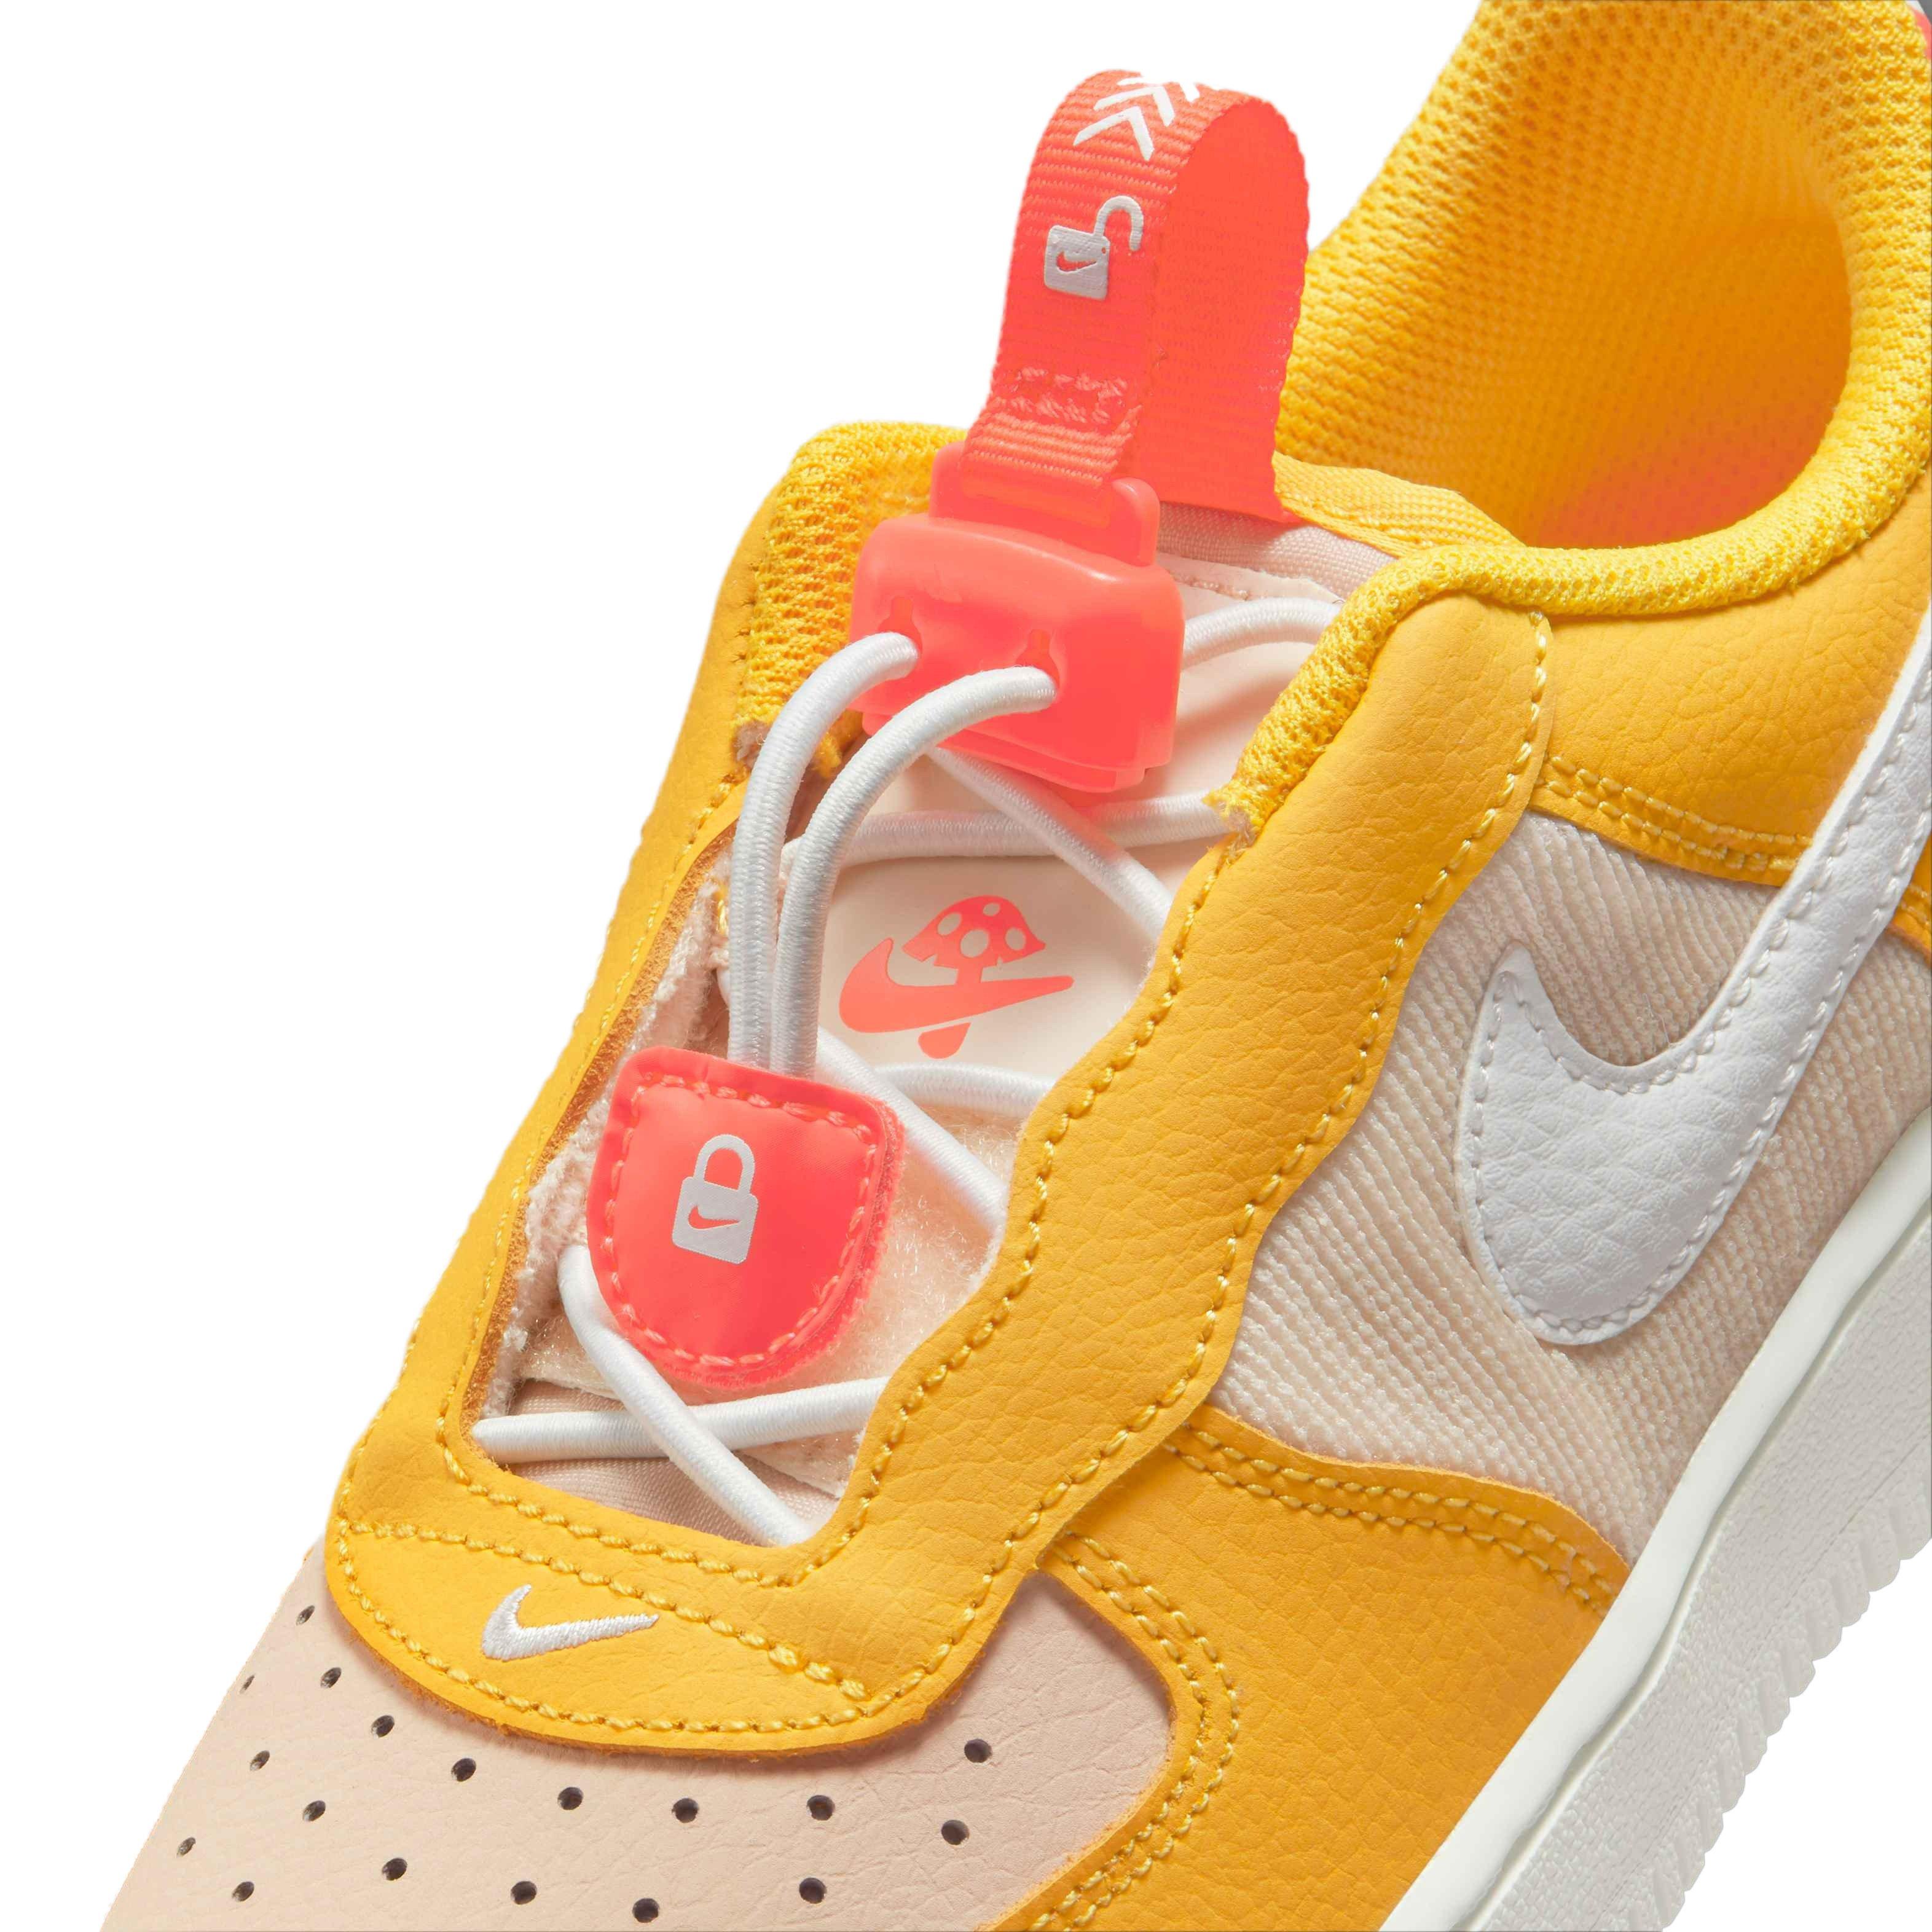 Nike Air Force Sneakers 1 AF1 Utility Yellow 